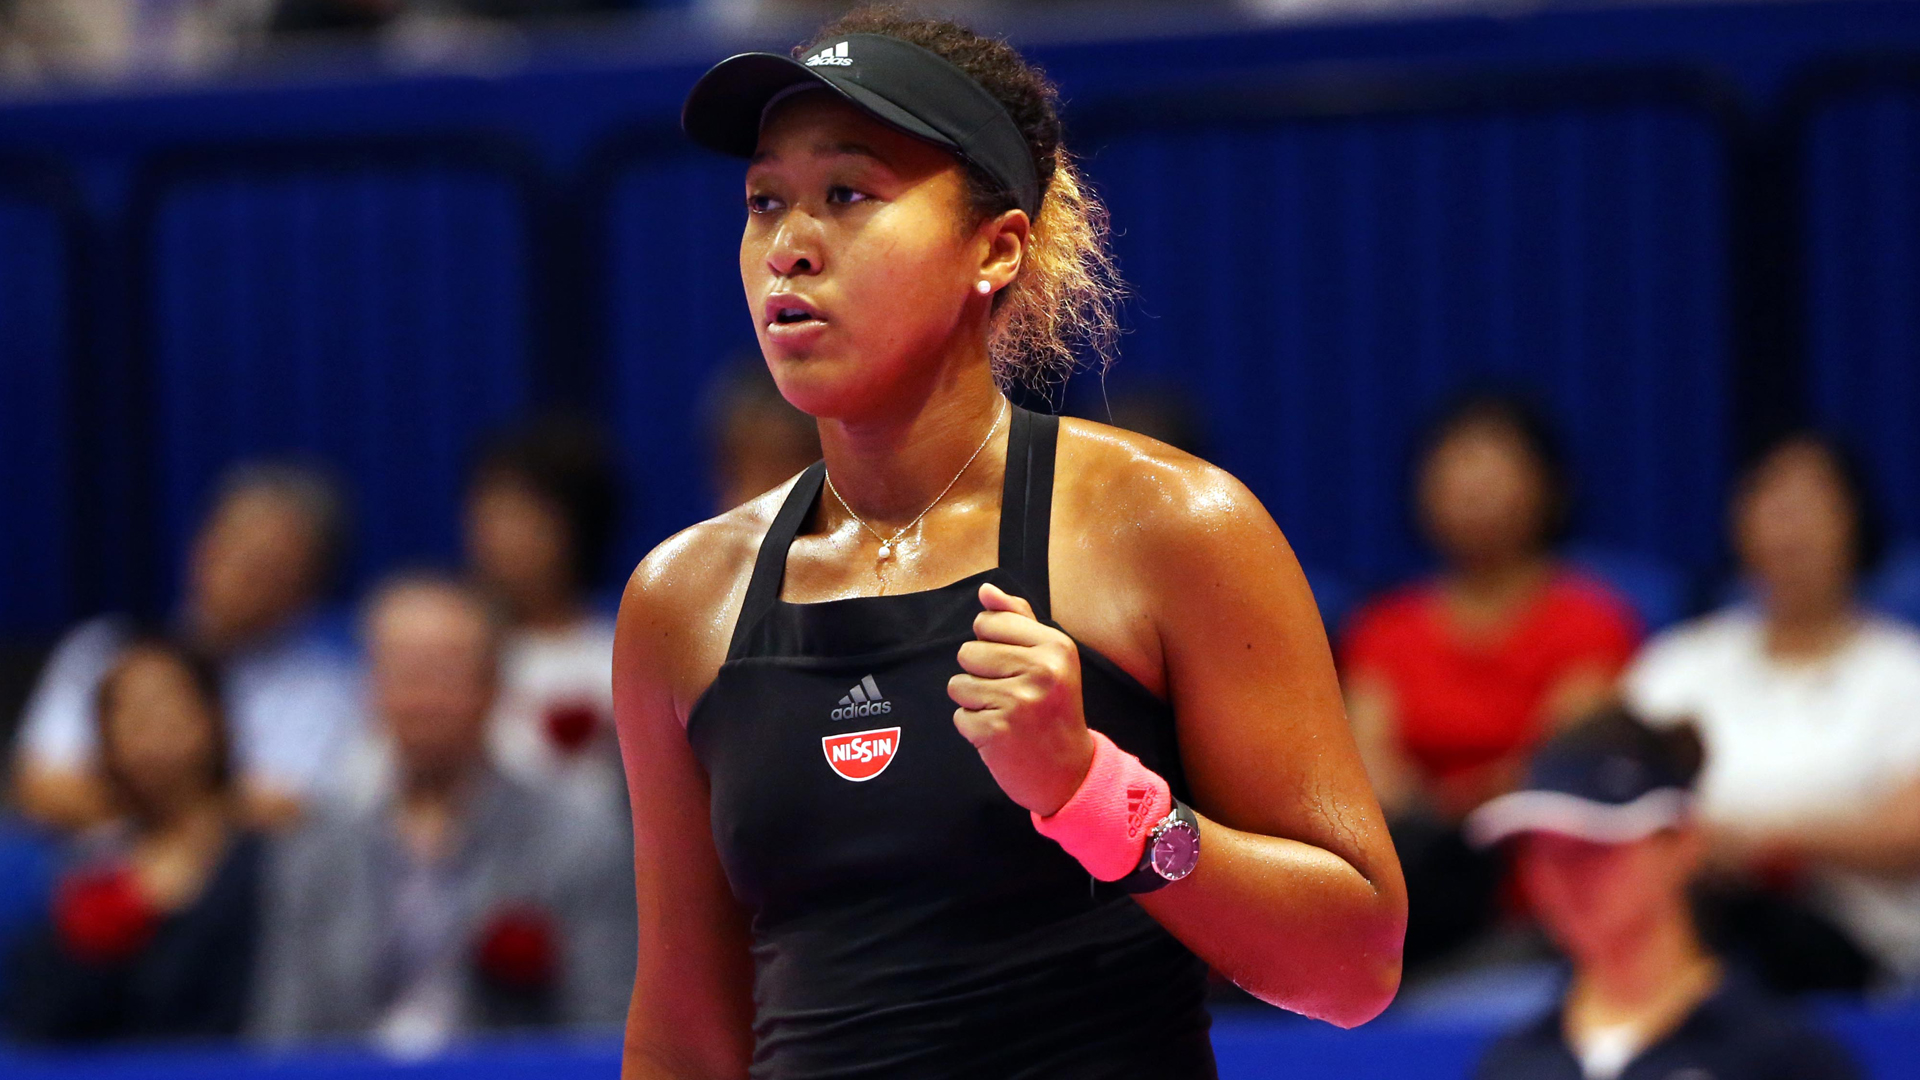 Having reached the semi-finals of the China Open, Naomi Osaka has risen to fourth in the WTA rankings.